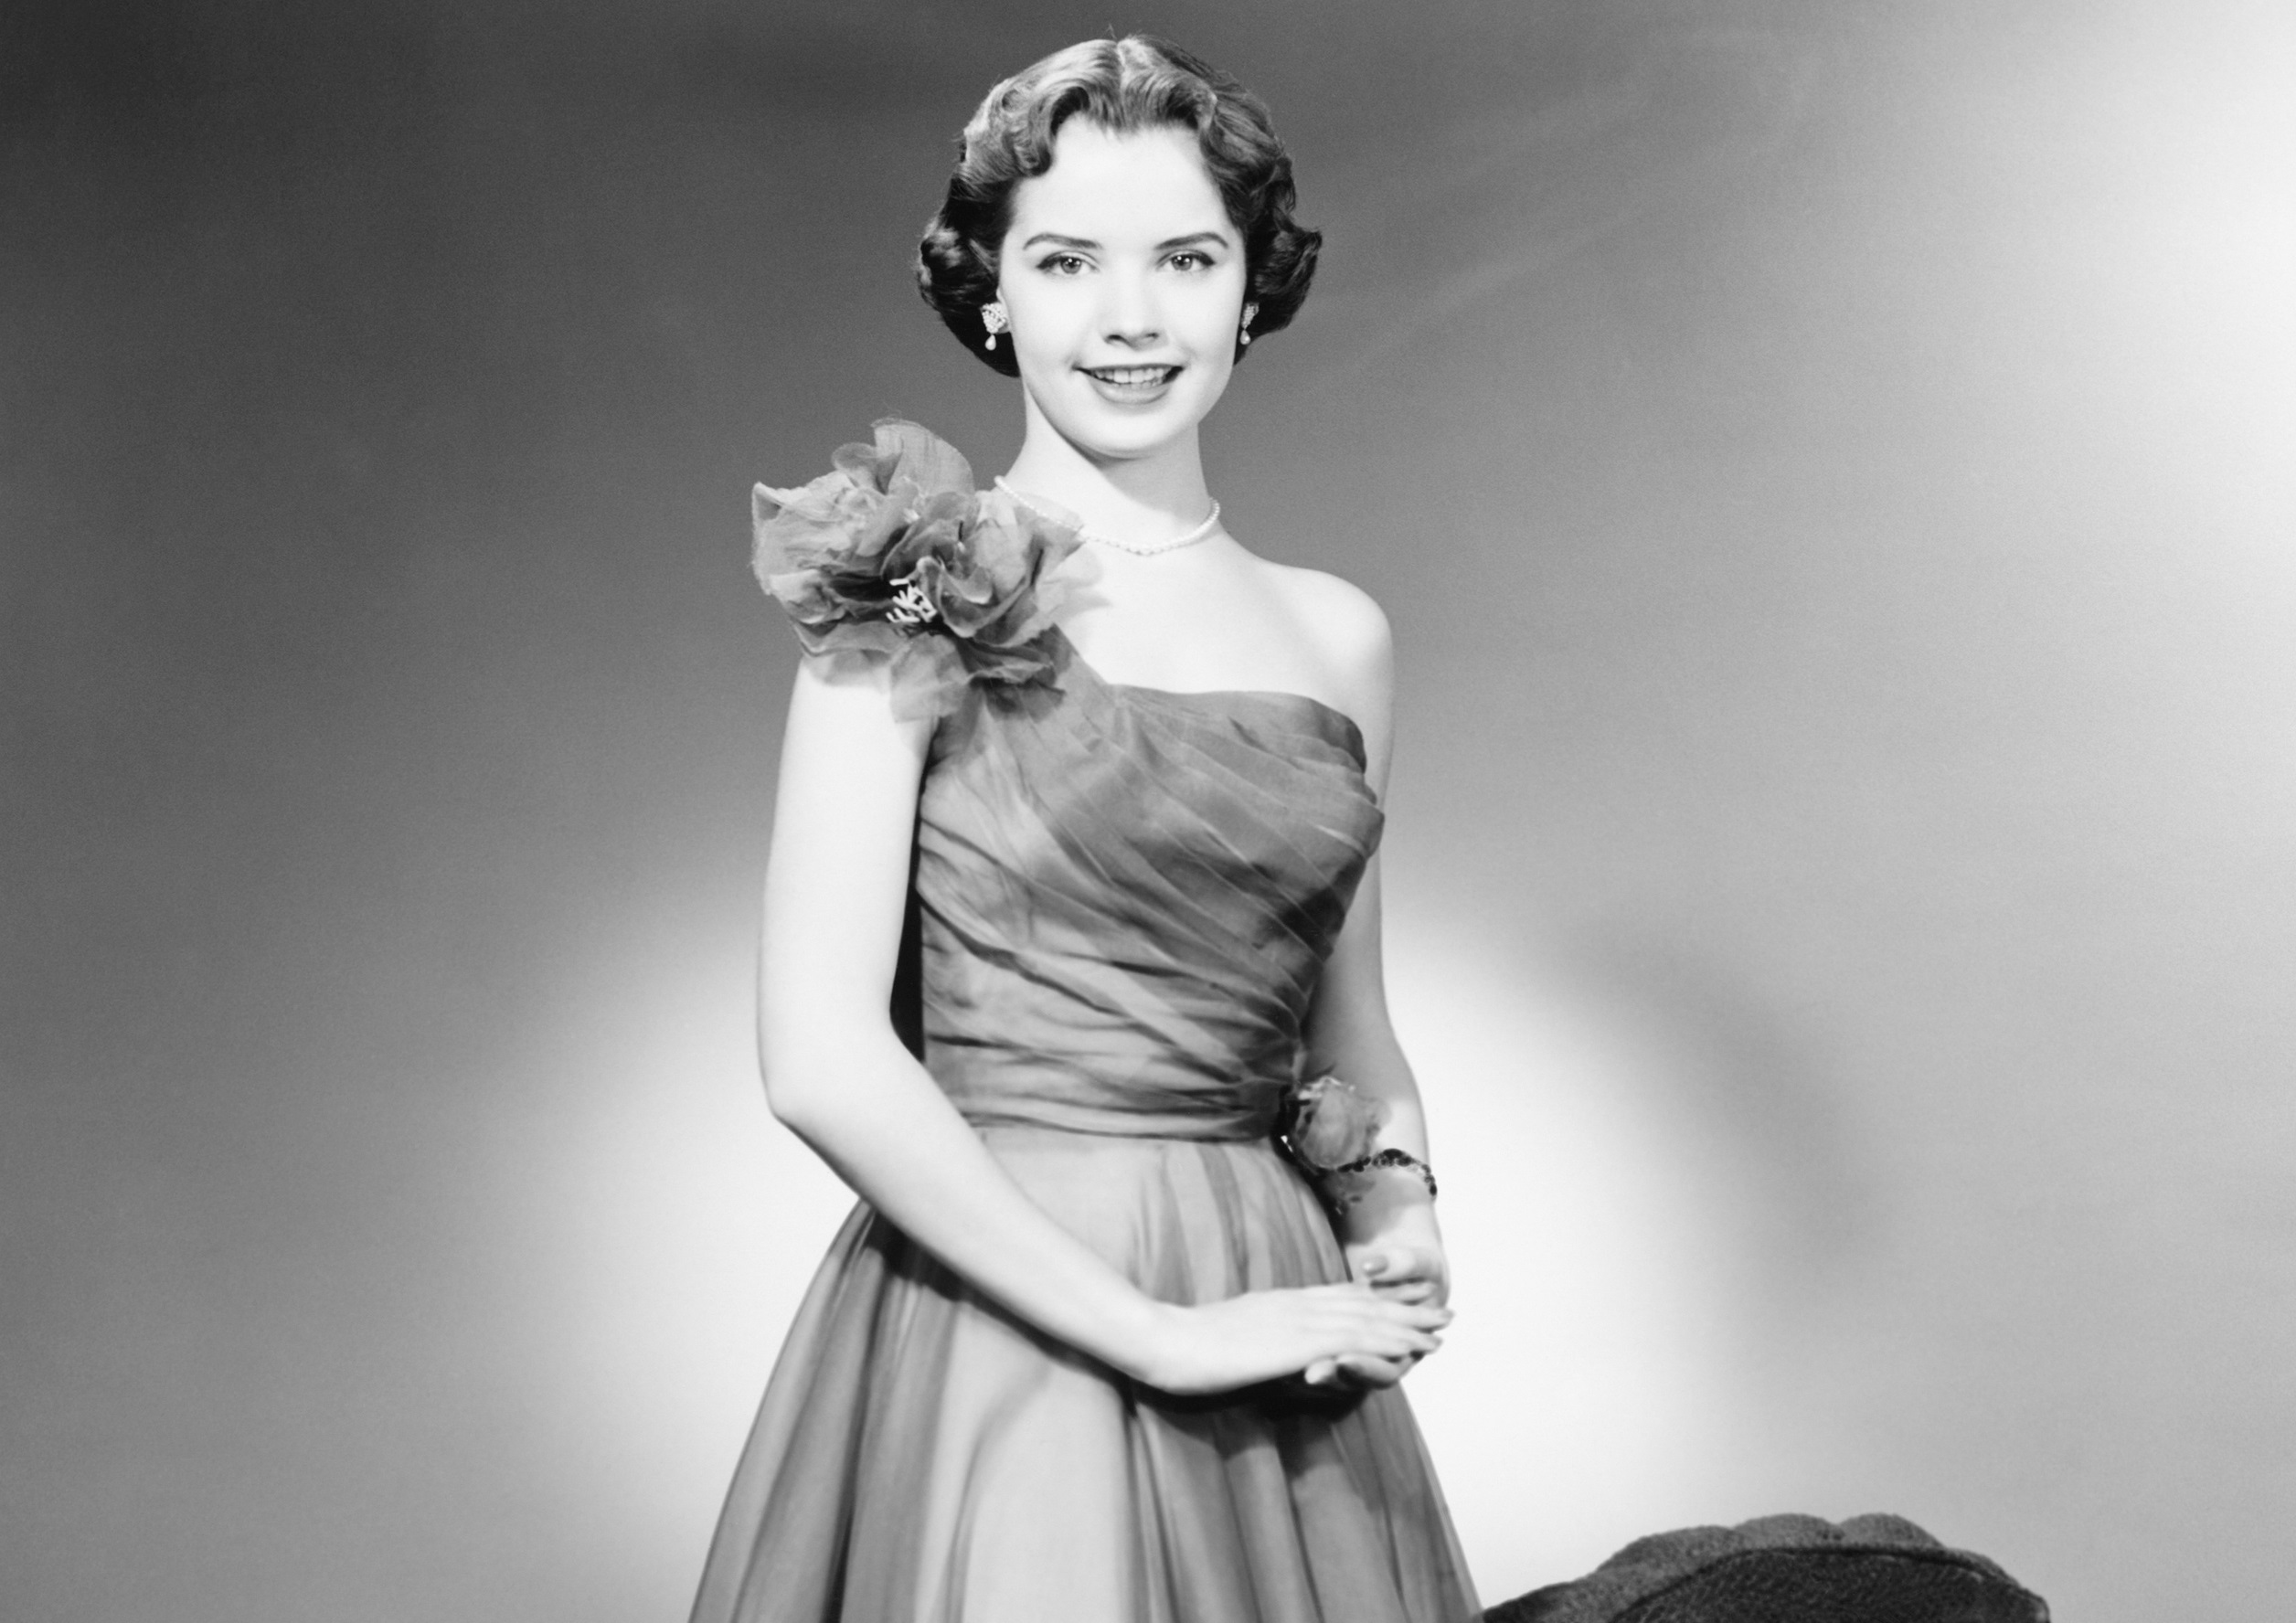 A black and white photo of a woman in a fancy dress